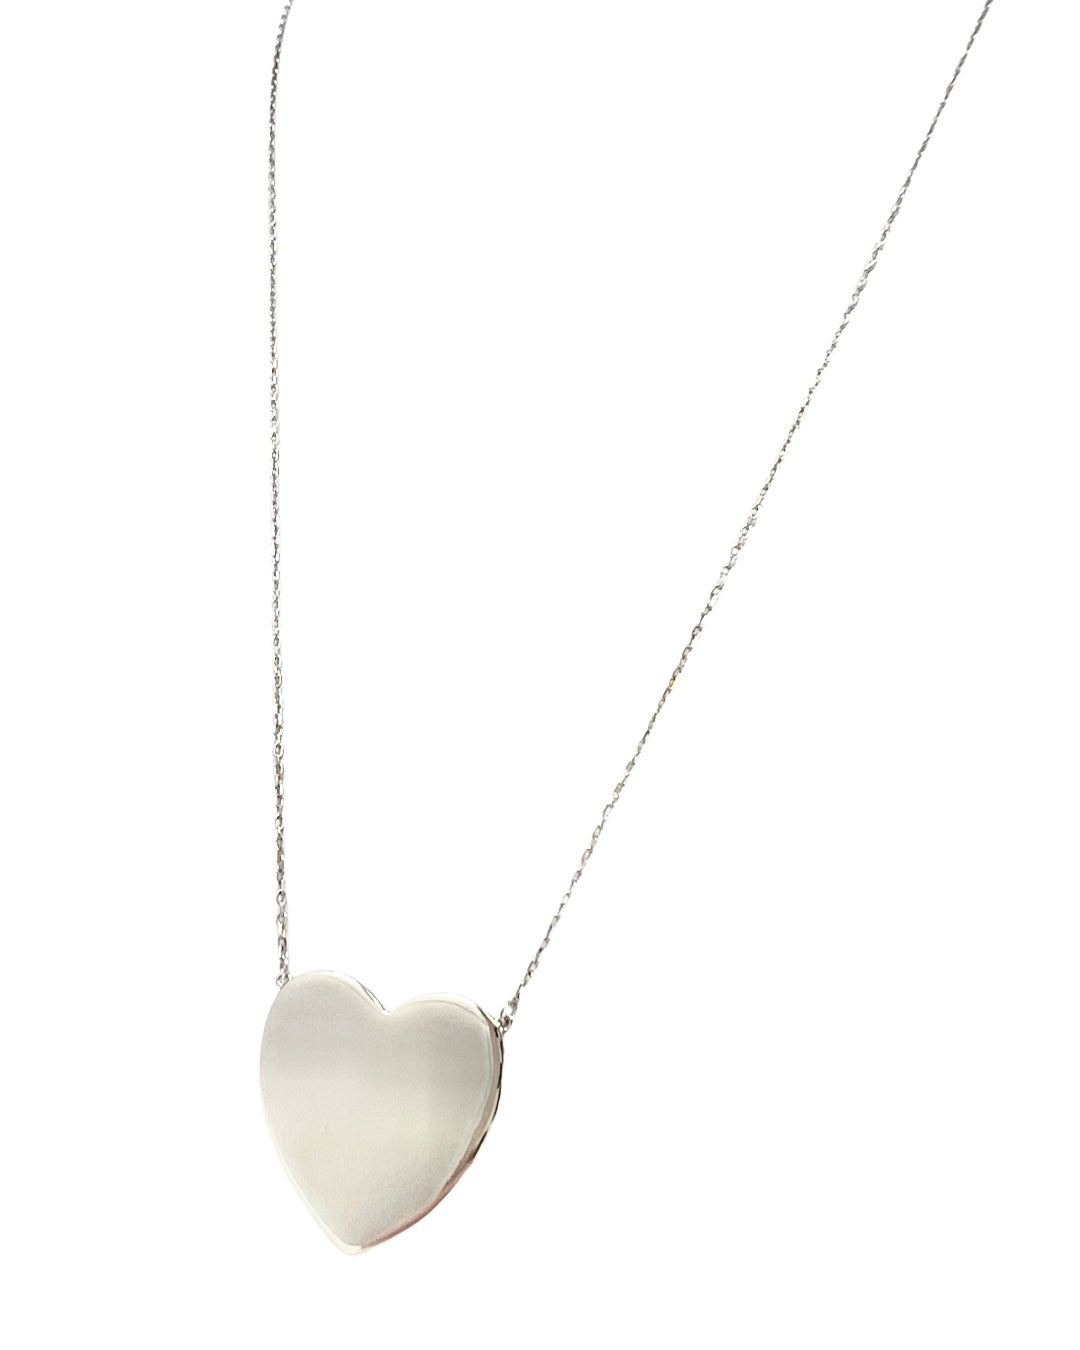 XL Heart Necklace in Silver